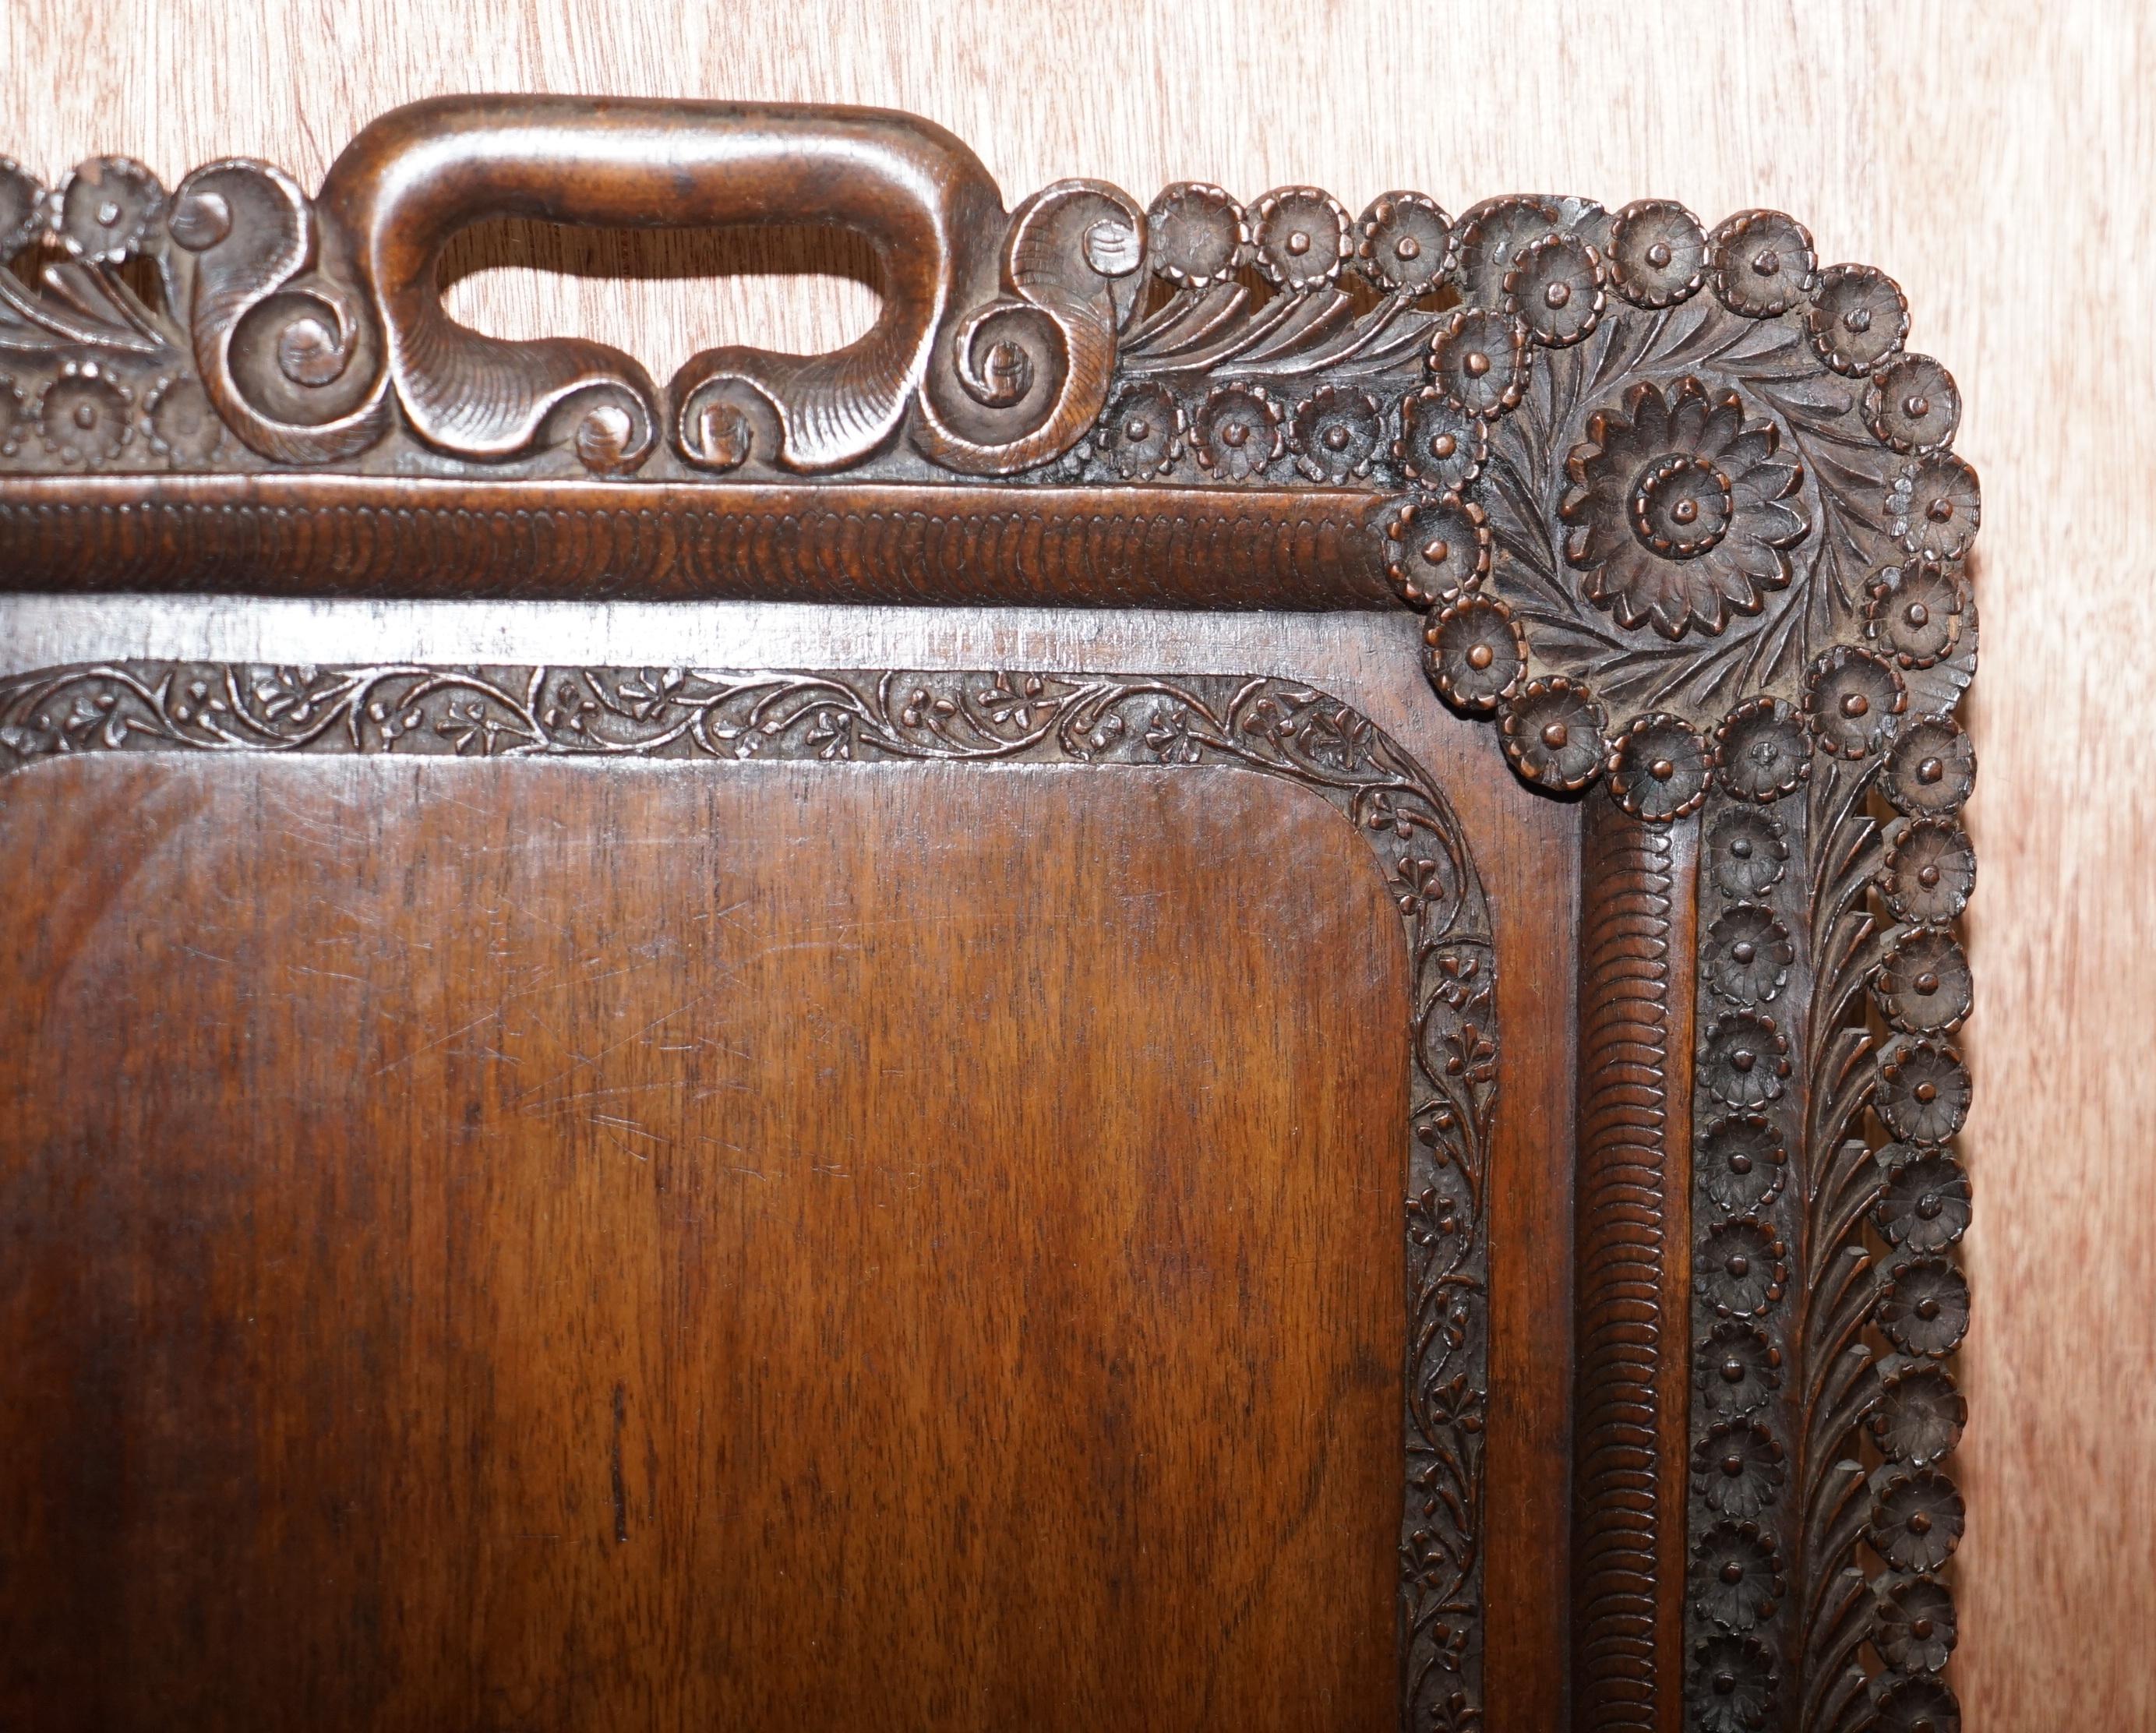 Mahogany Lovely circa 1900 Anglo-Indian Hand Carved Burmese Wood Serving Tray